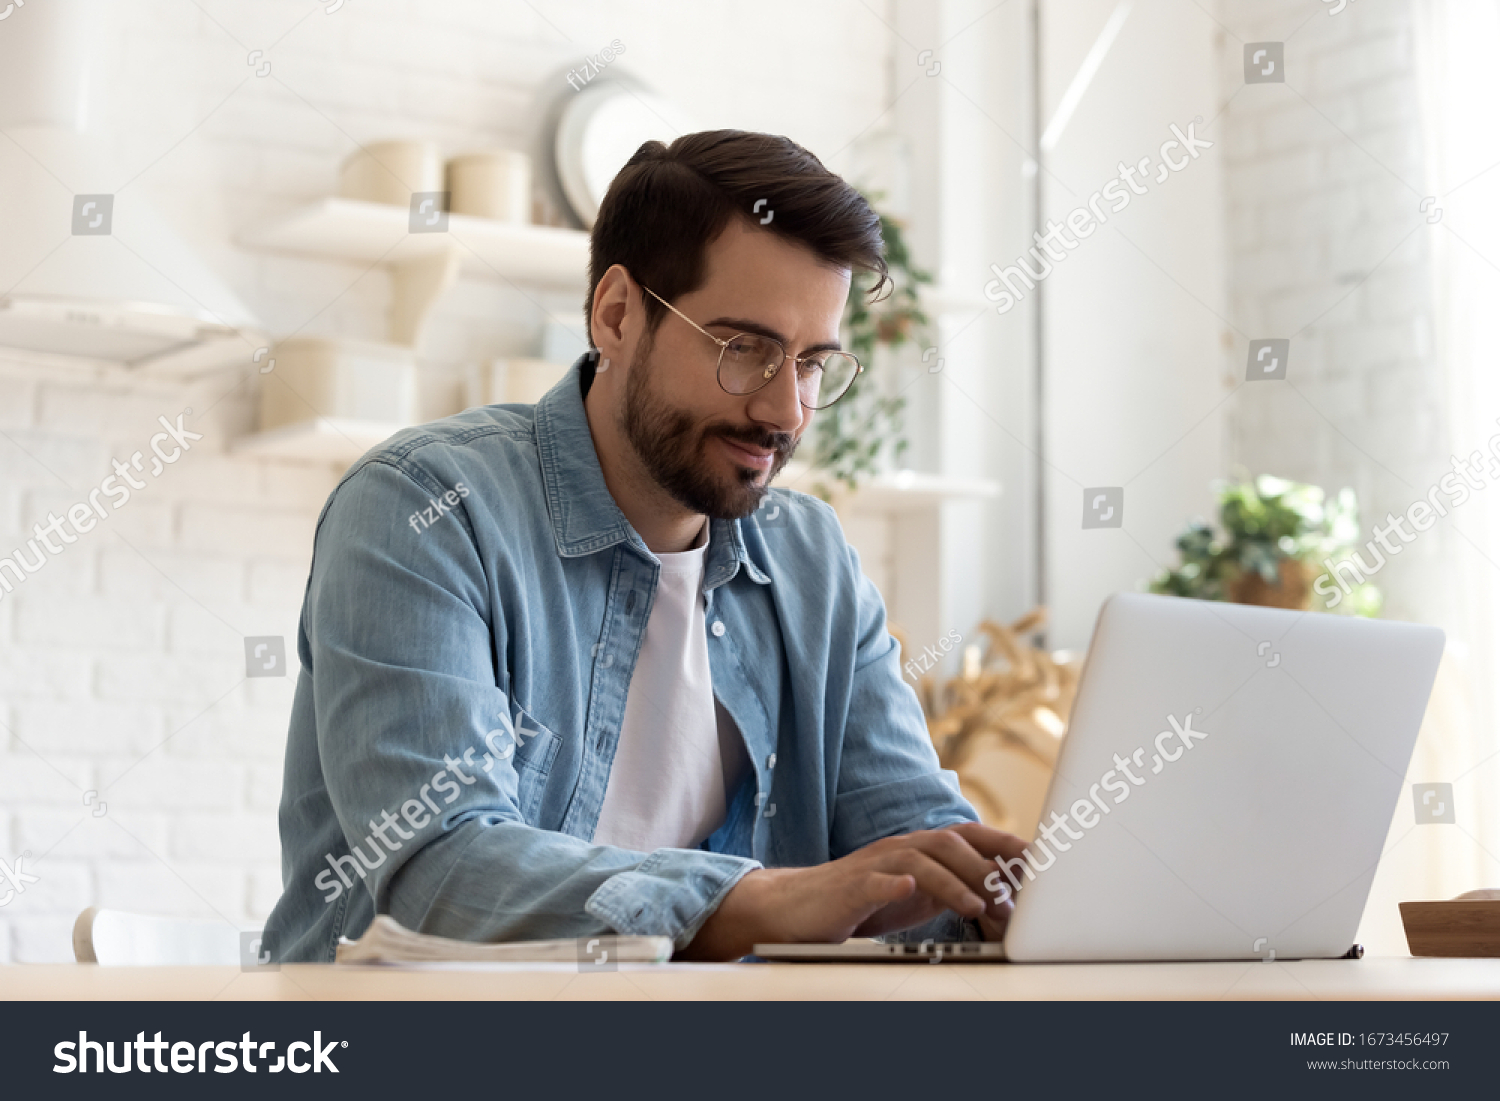 Focused young man wearing glasses using laptop, typing on keyboard, writing email or message, chatting, shopping, successful freelancer working online on computer, sitting in modern kitchen #1673456497